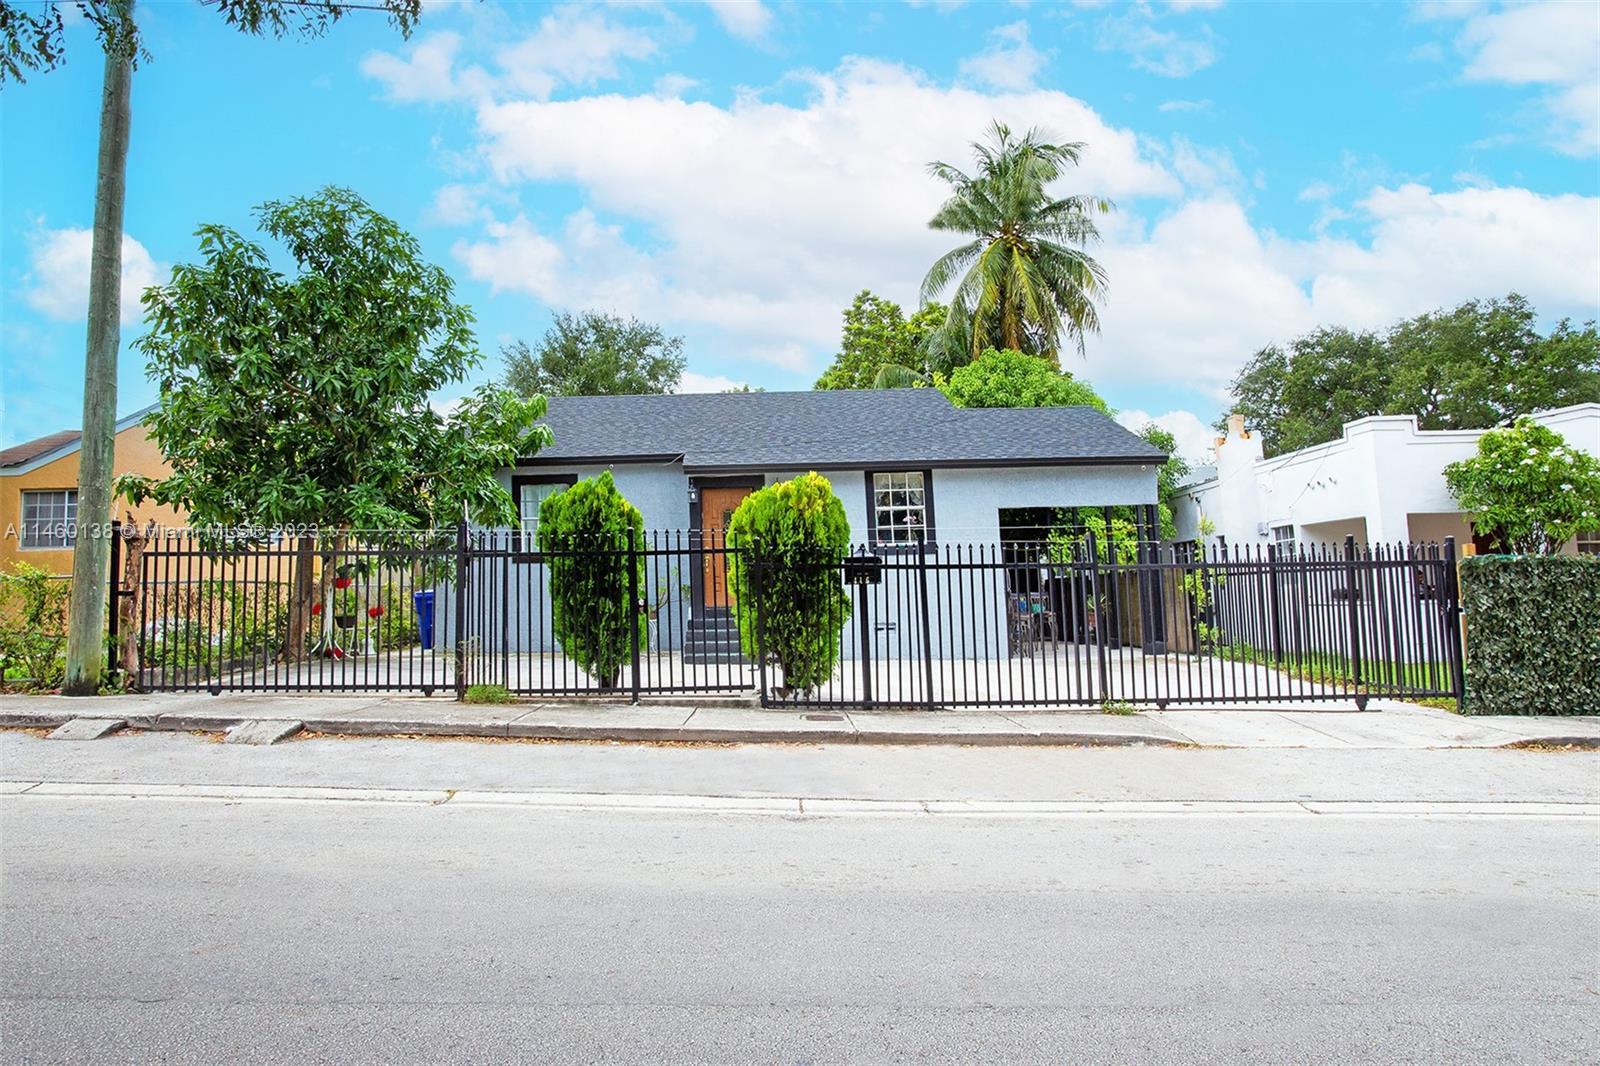 Photo of 416 NW 19th Ave in Miami, FL